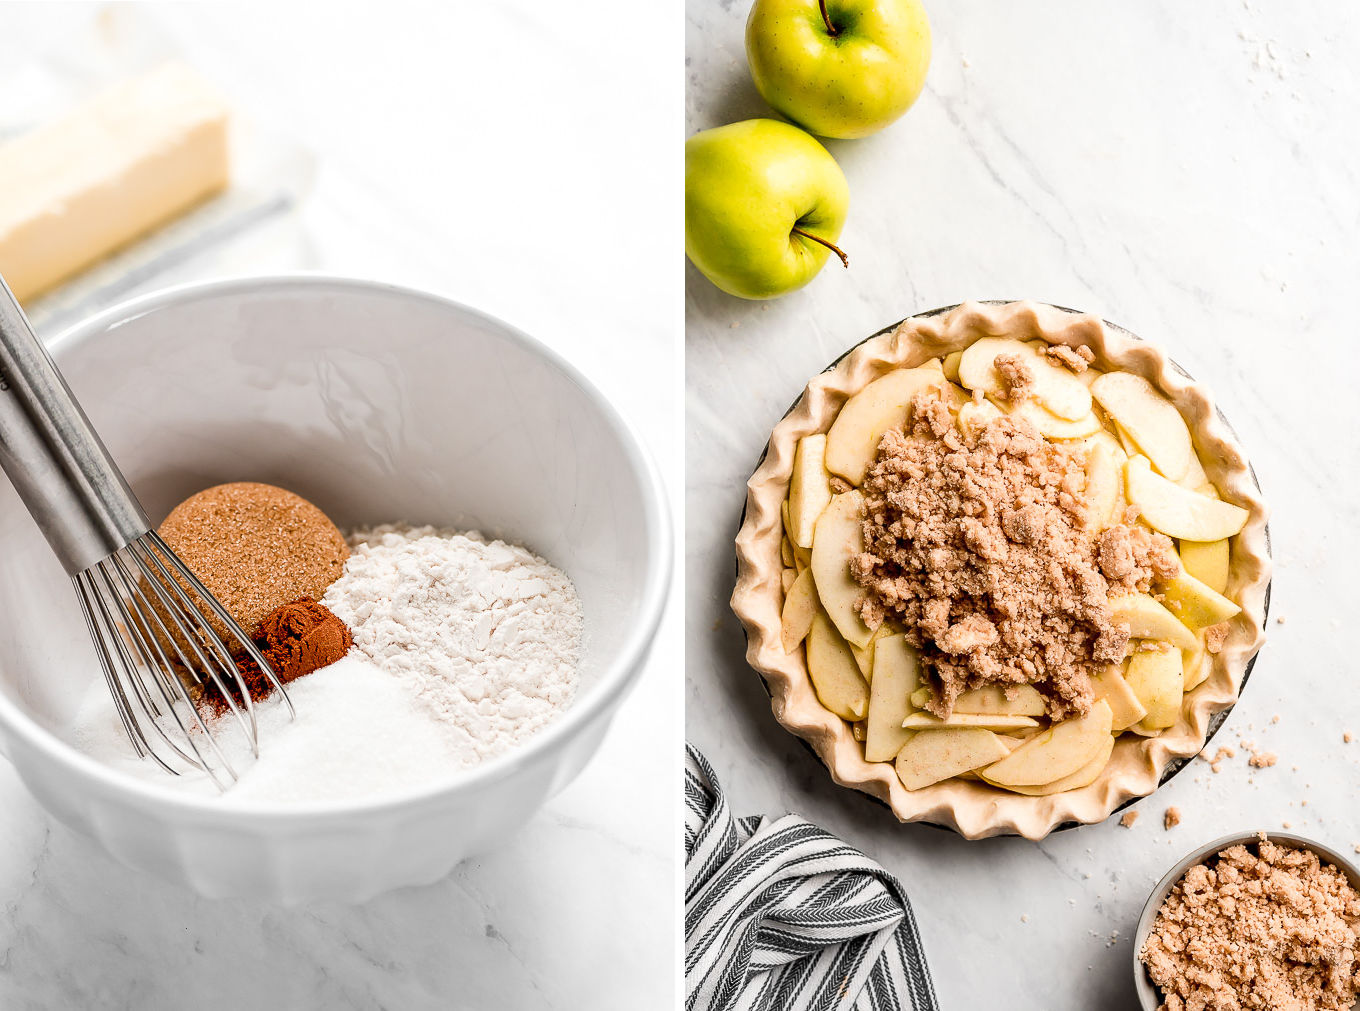 A bowl of ingredients for a crumble topping. An unbaked apple pie with a crumble topping on top.